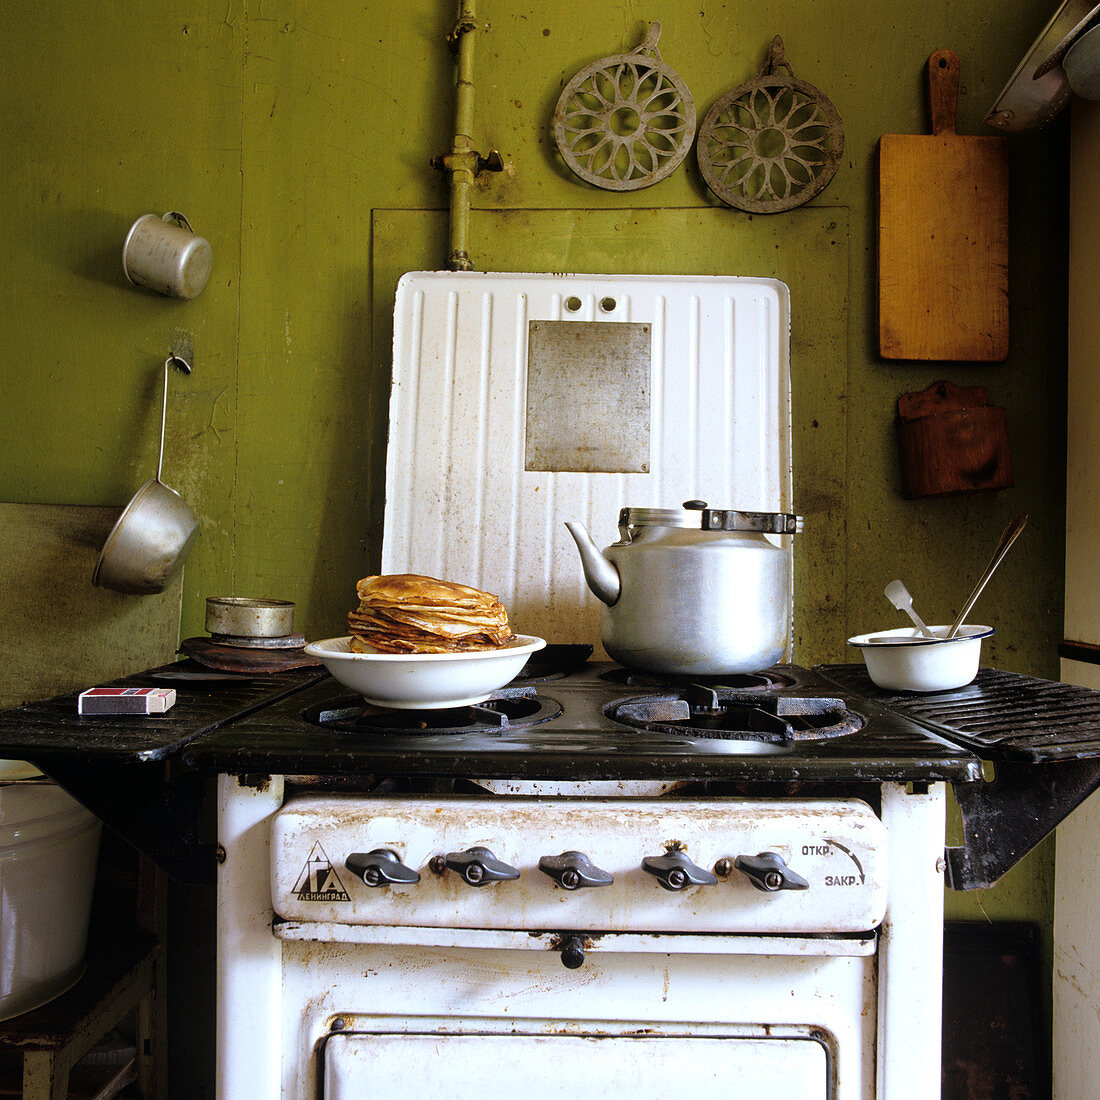 Dish of freshly cooked pancakes and kettle on 50s cooker in simple kitchen